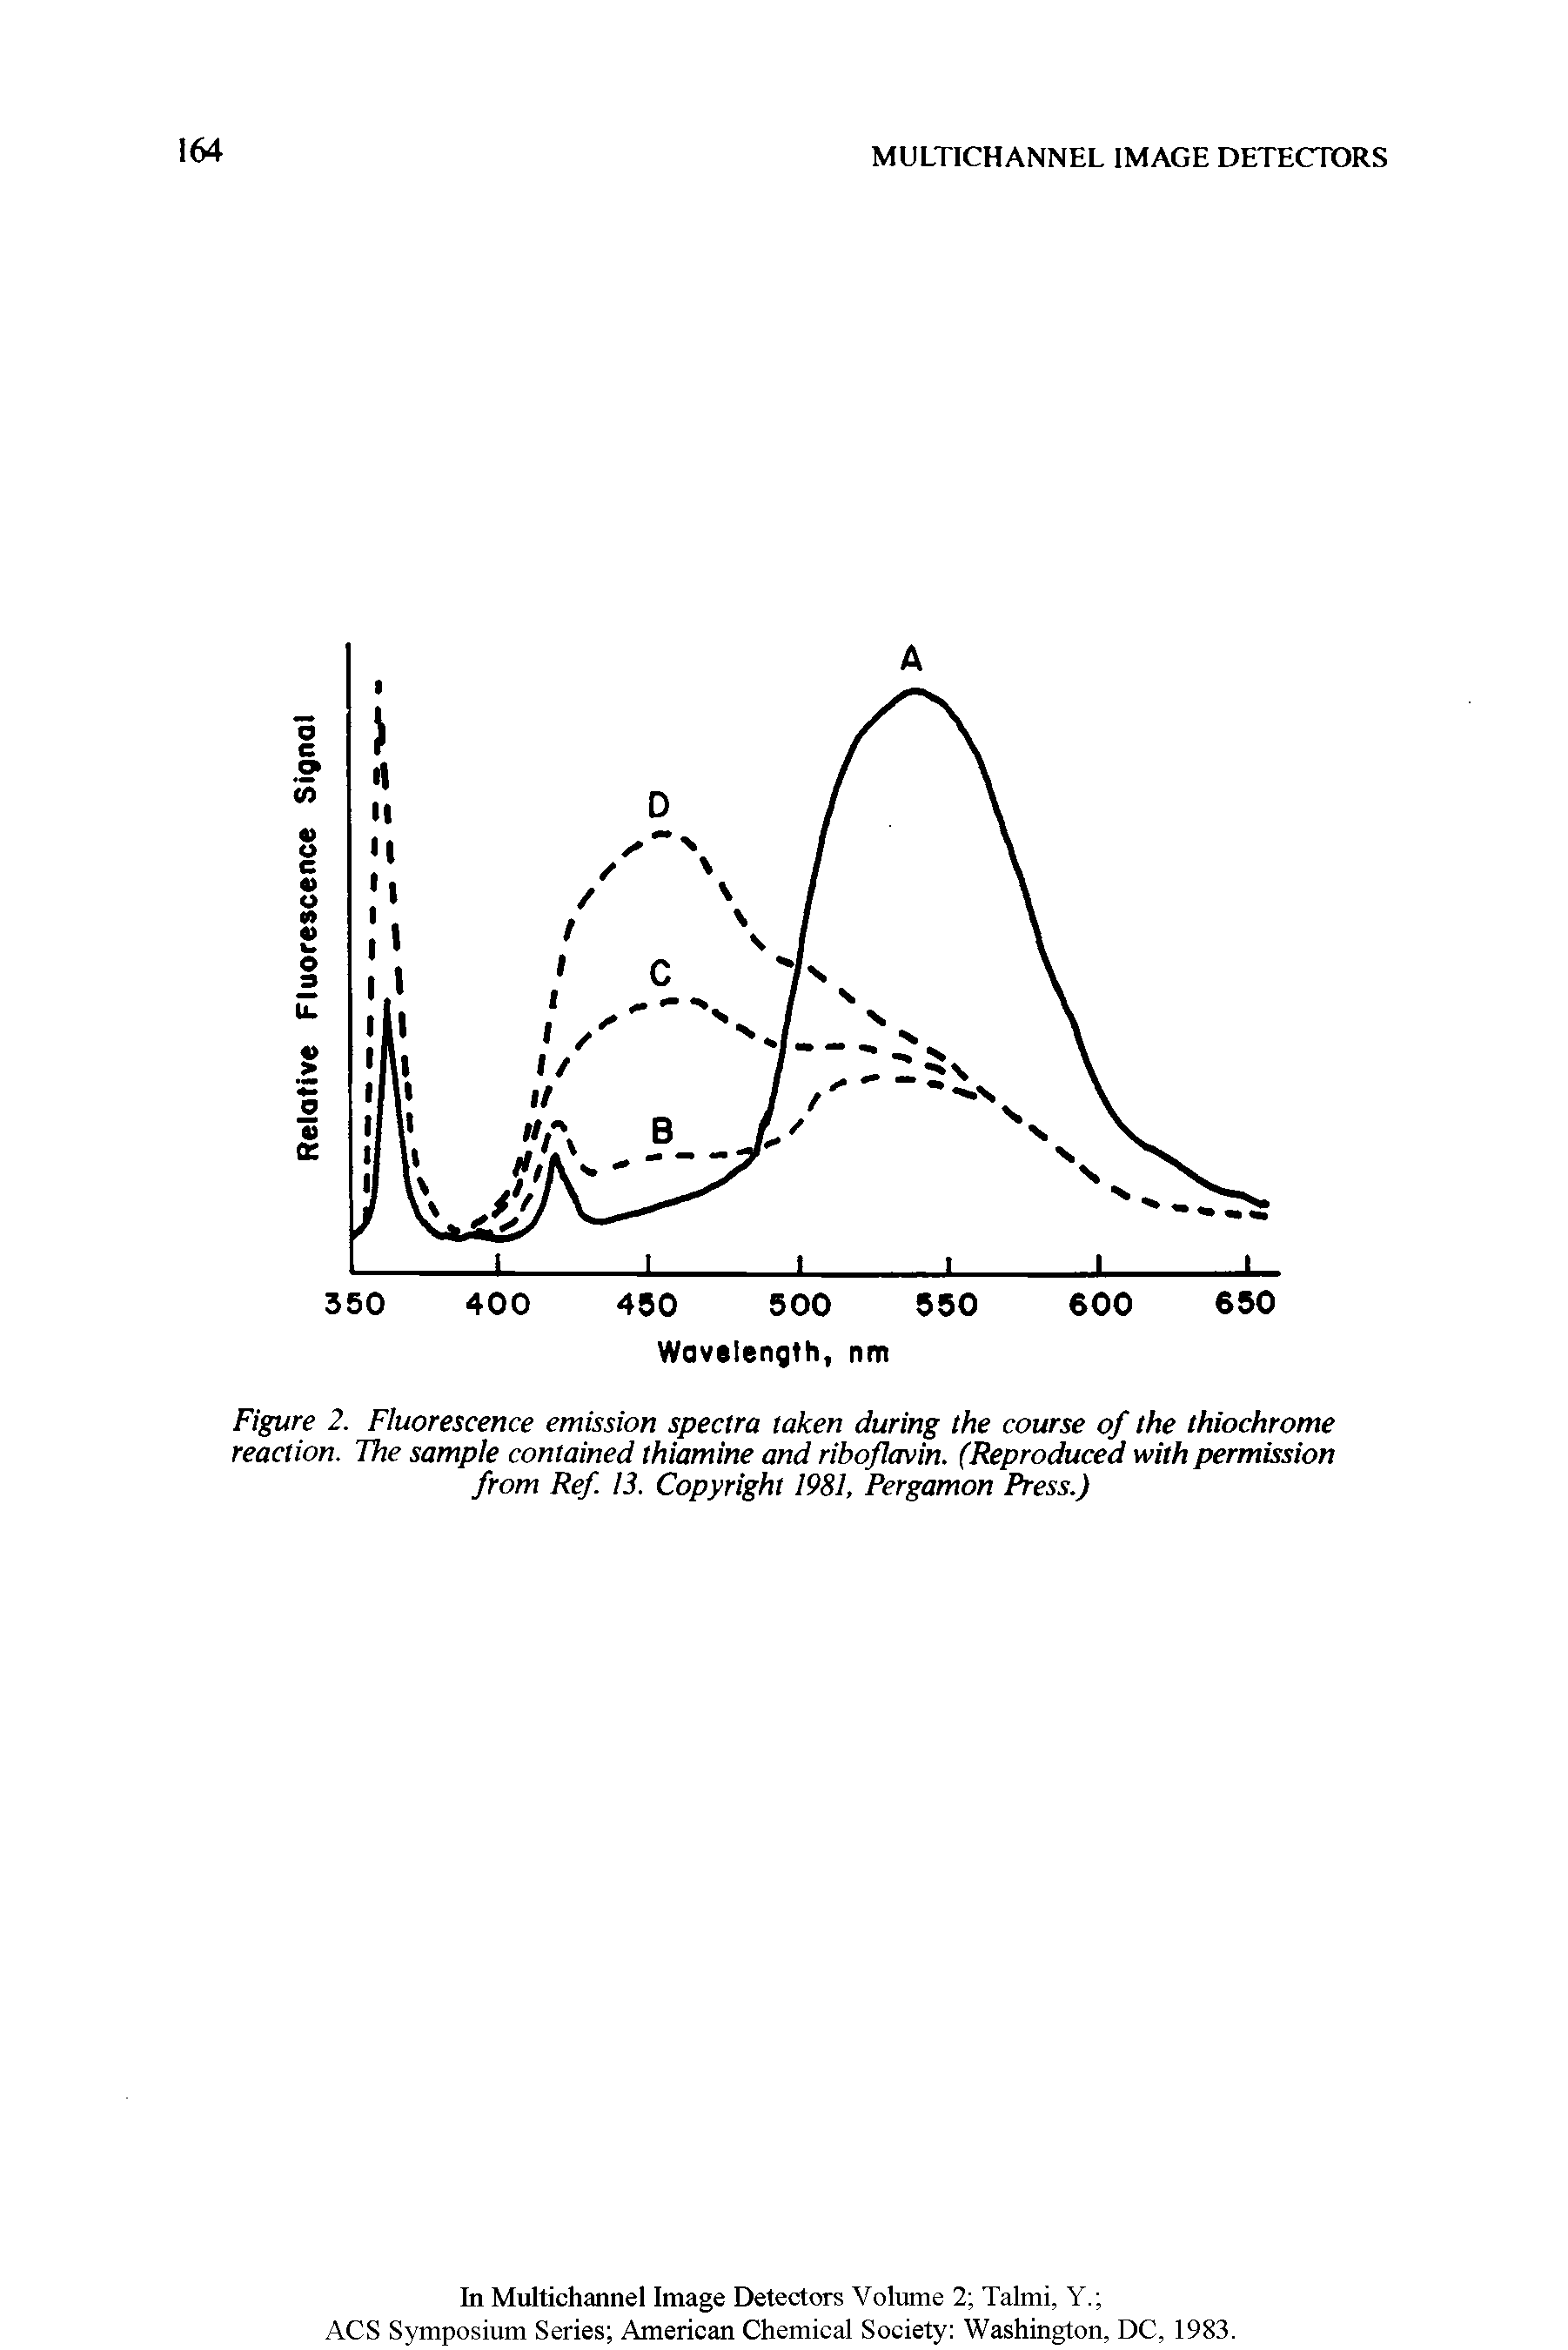 Figure 2. Fluorescence emission spectra taken during the course of the thiochrome reaction. The sample contained thiamine and riboflavin. (Reproduced with permission from Ref. 13. Copyright 1981, Pergamon Press.)...